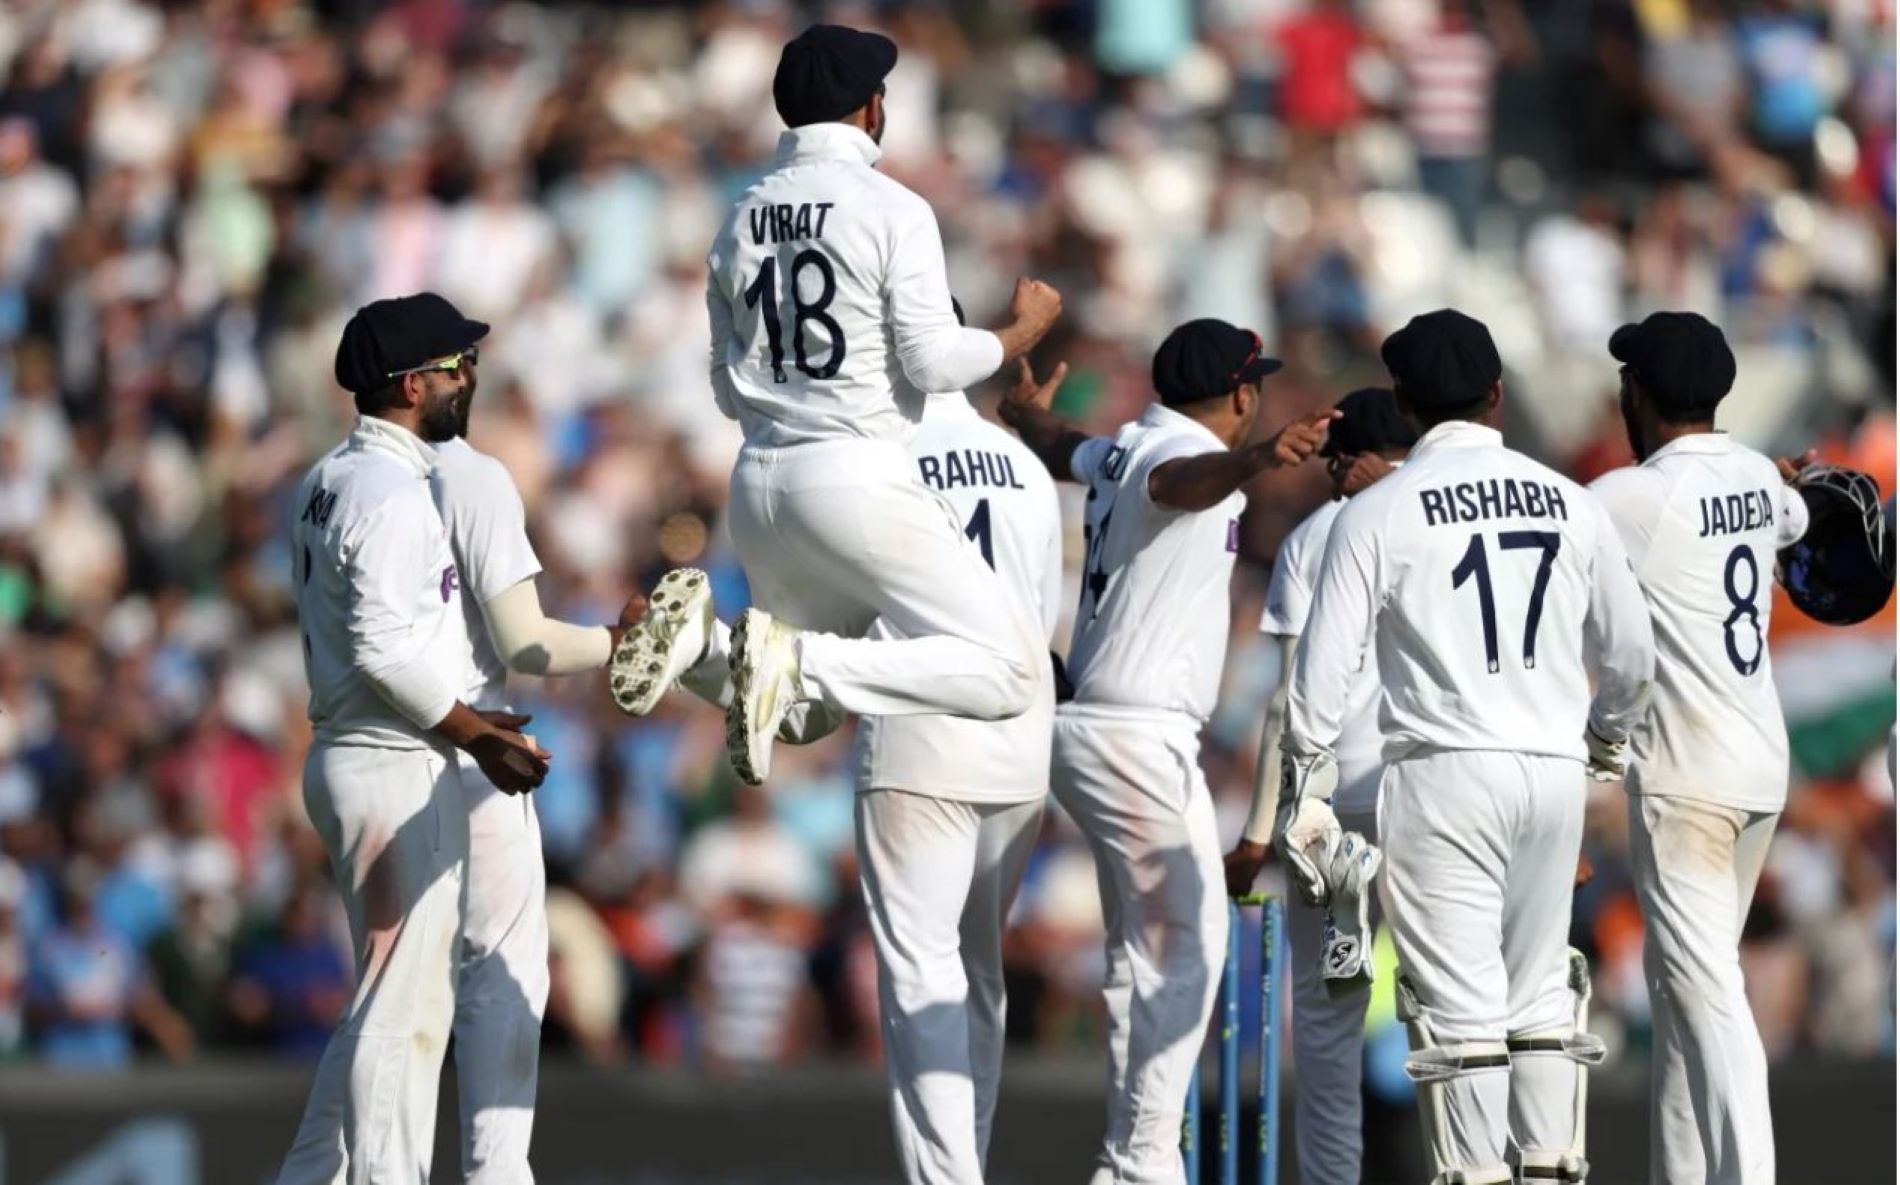 India scripted one of the most remarkable comeback Test wins.